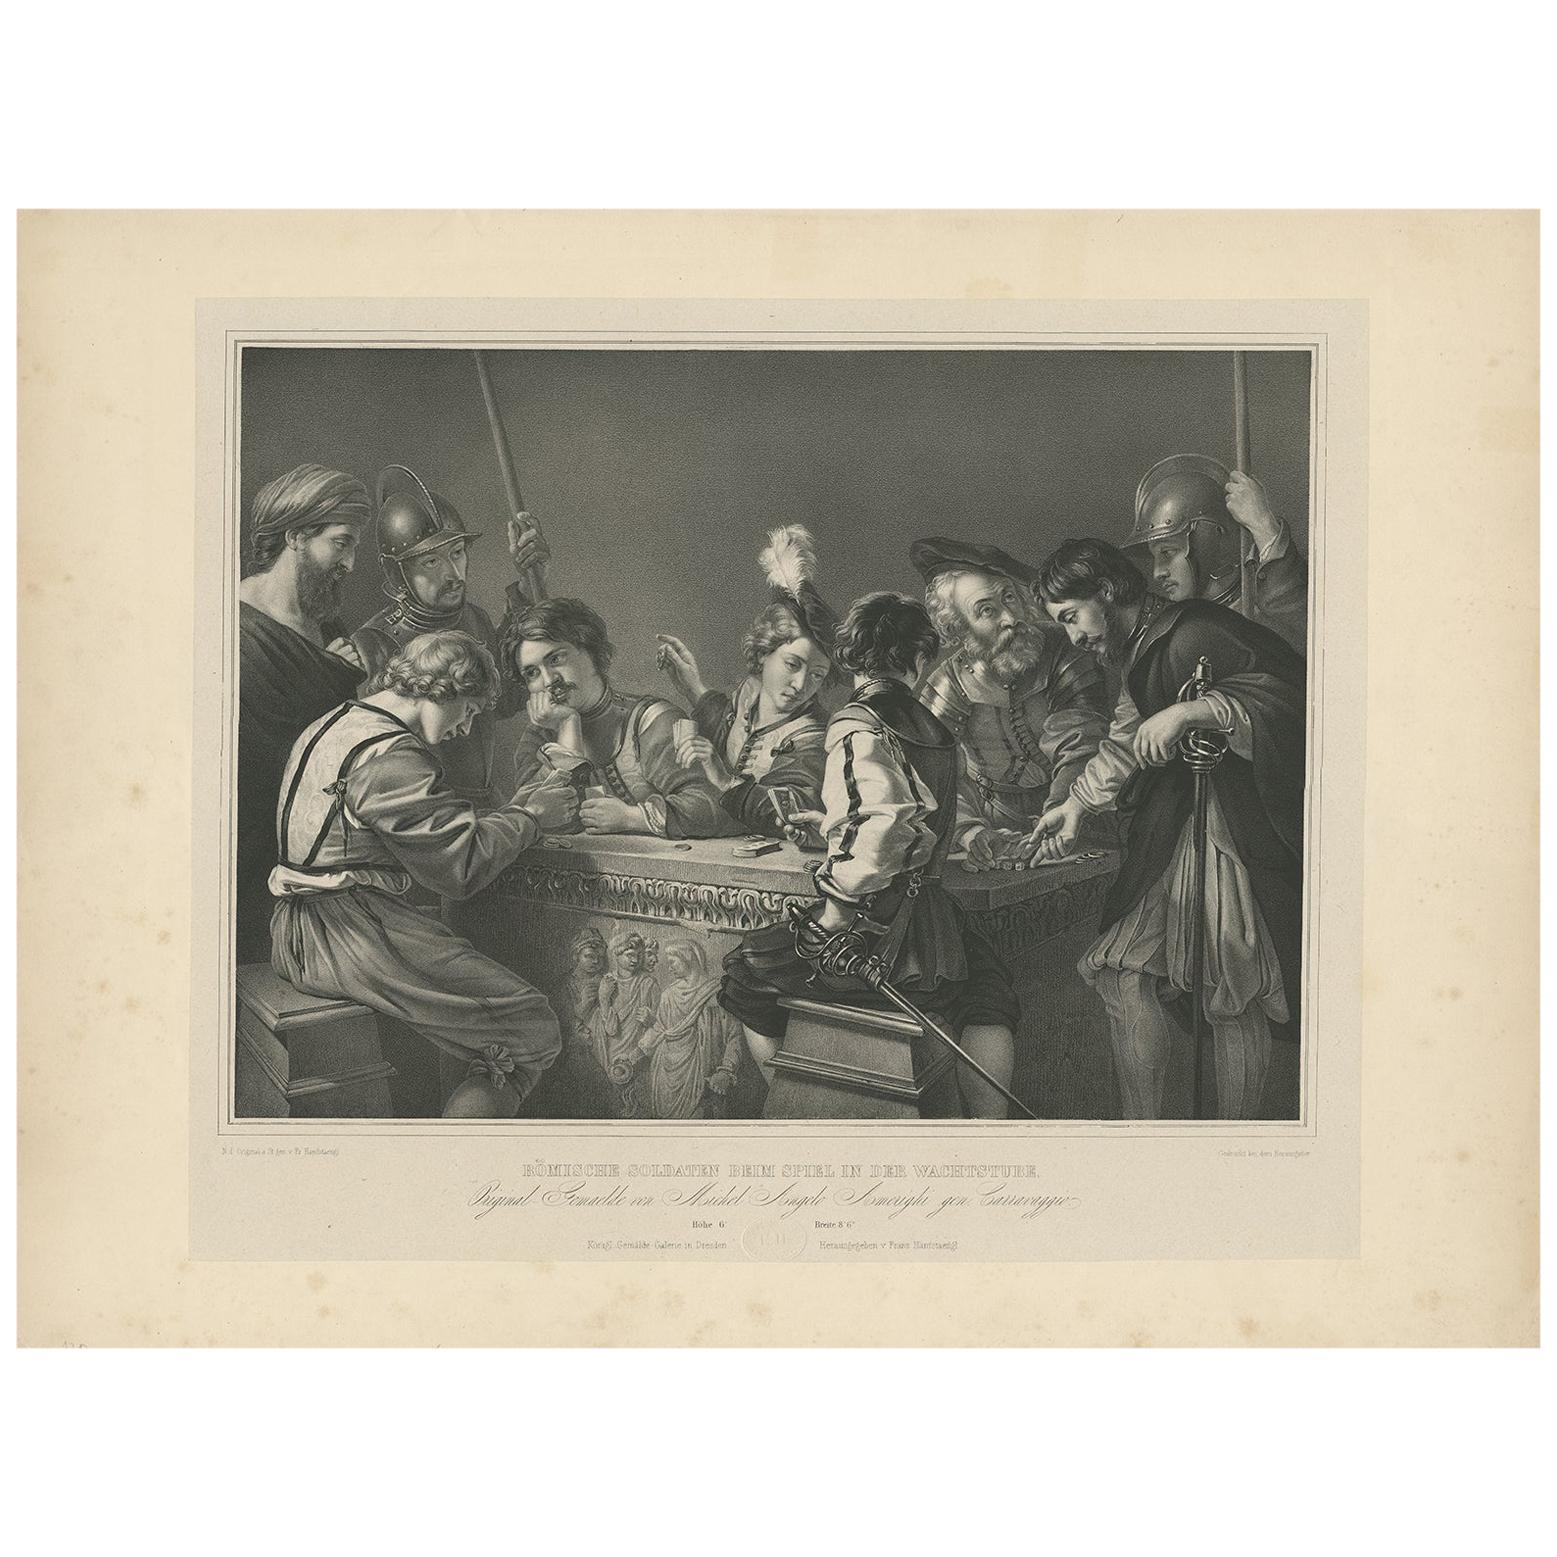 Antique Print of a Caravaggio Painting showing Soldiers Gambling, 'circa 1840'